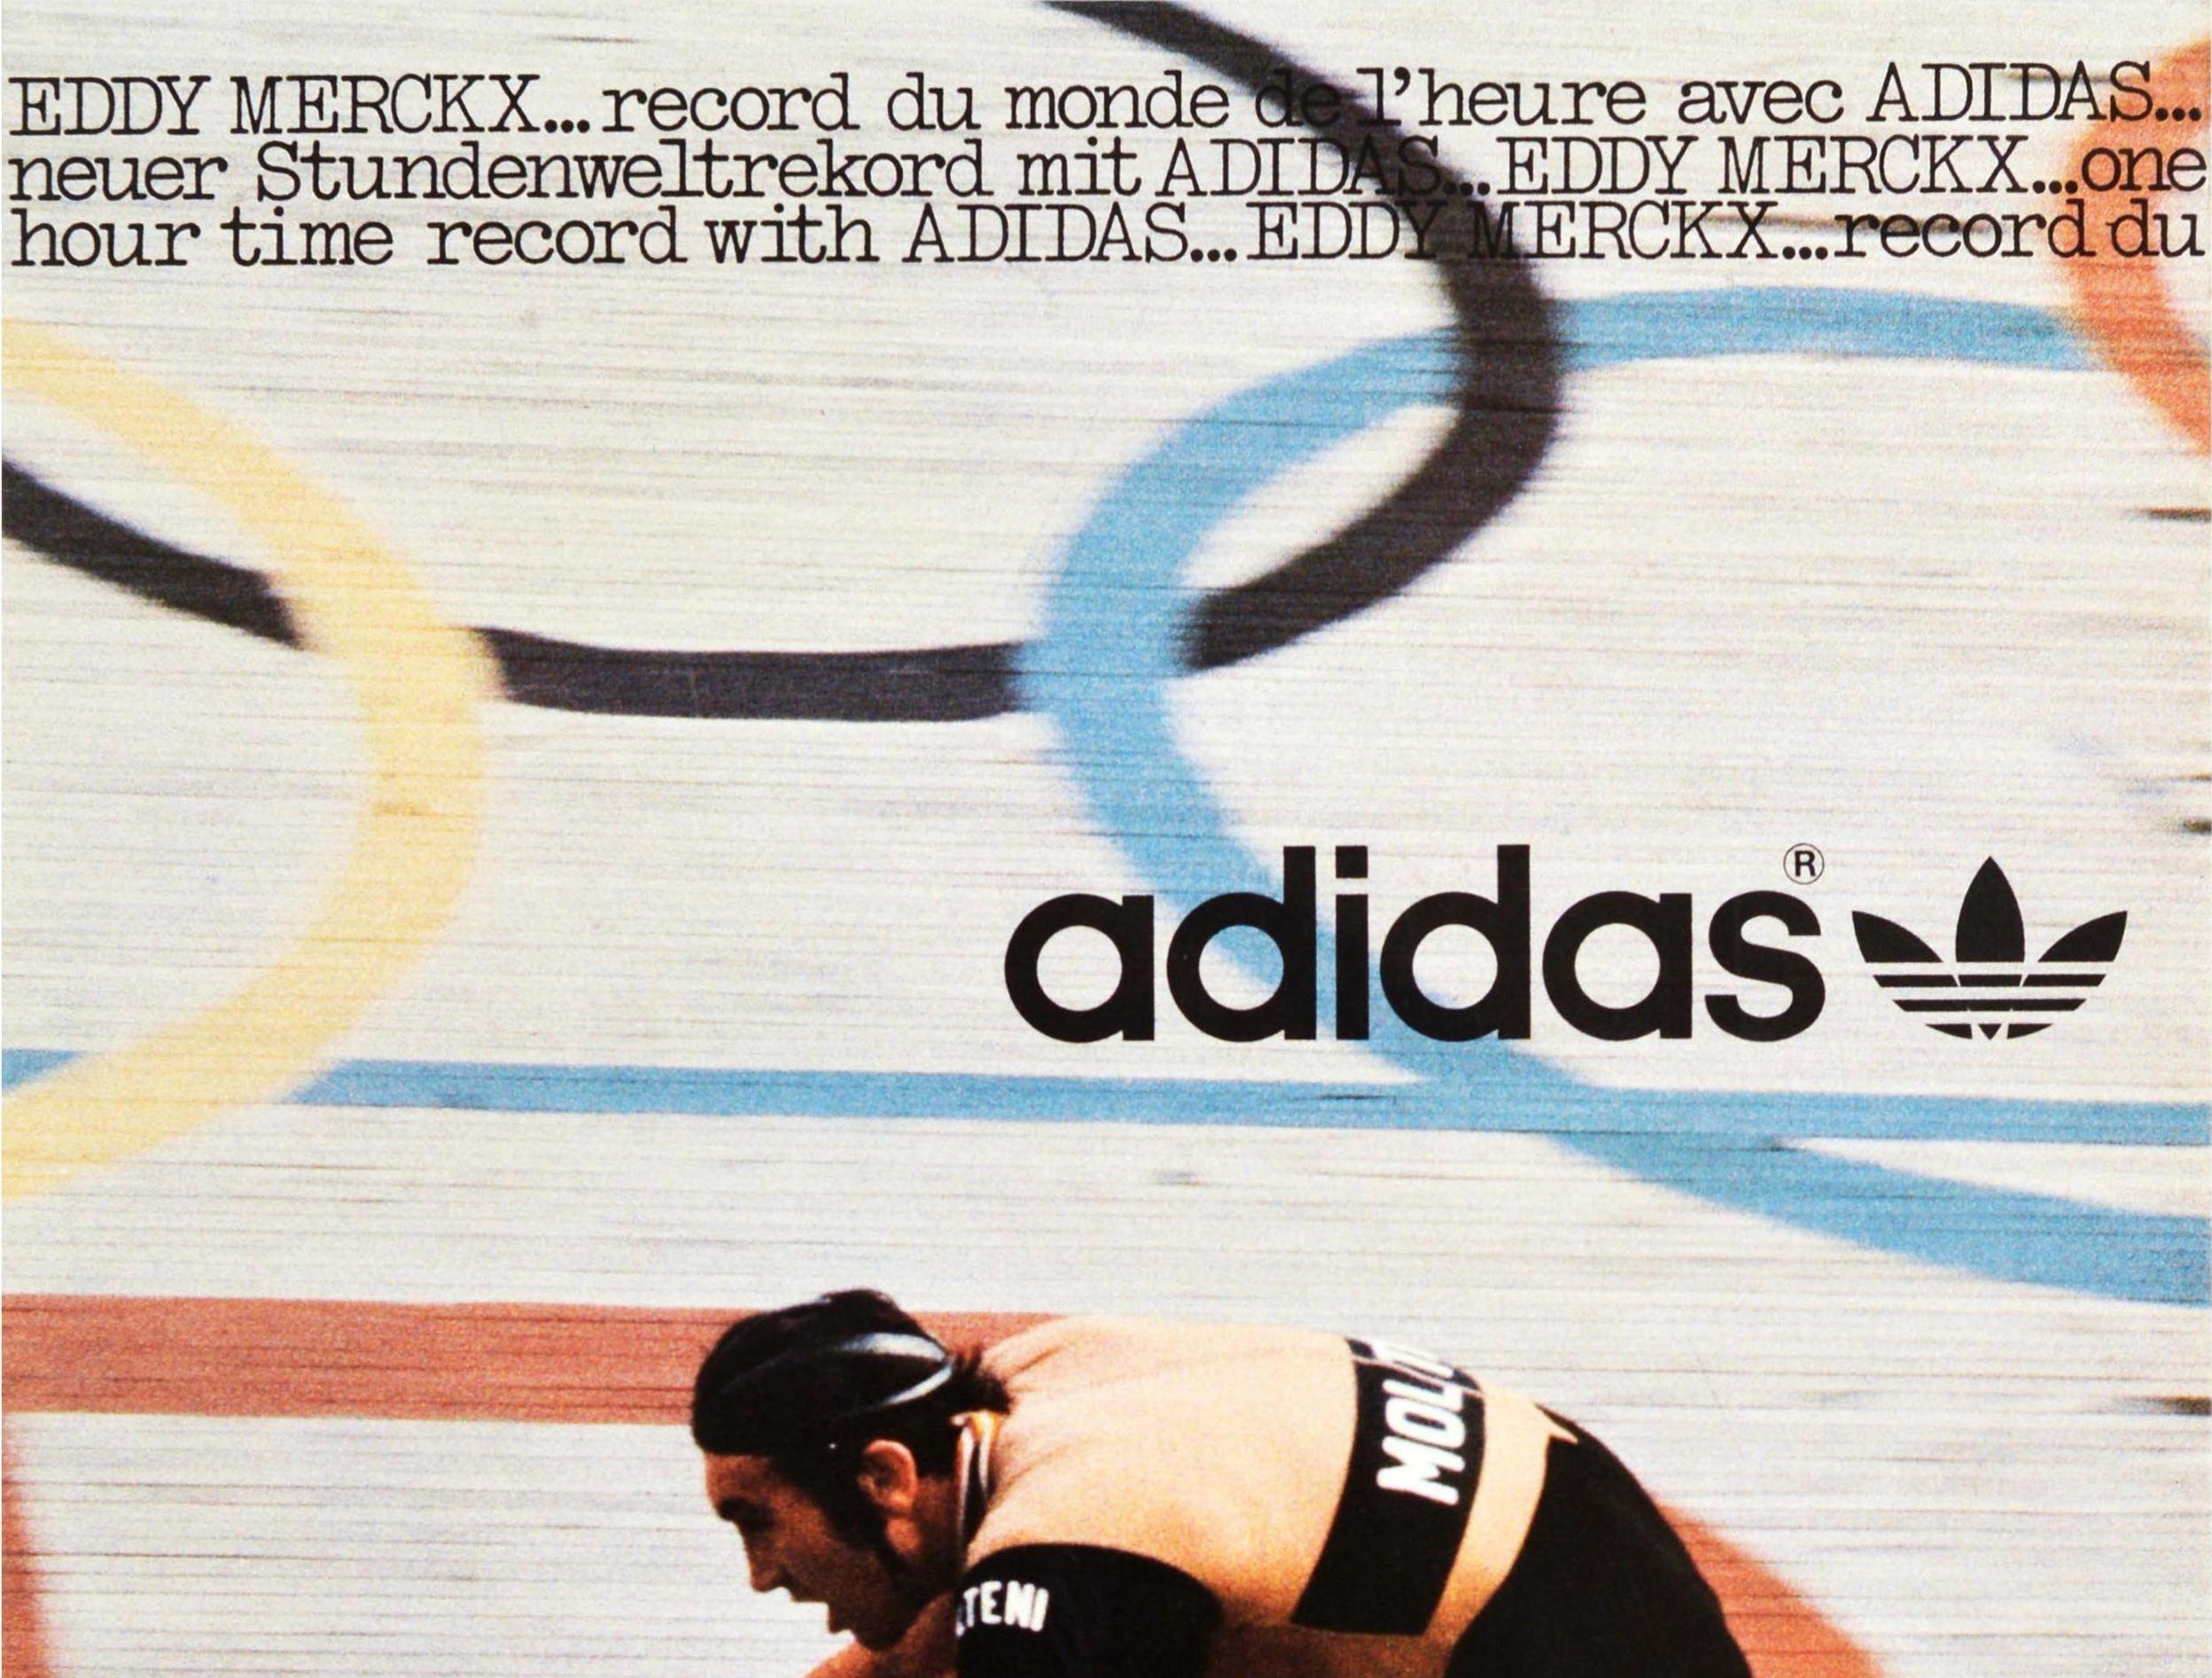 Original Vintage Poster Adidas Sport Shoes Eddy Merckx World Record Cyclist Race - Print by Unknown